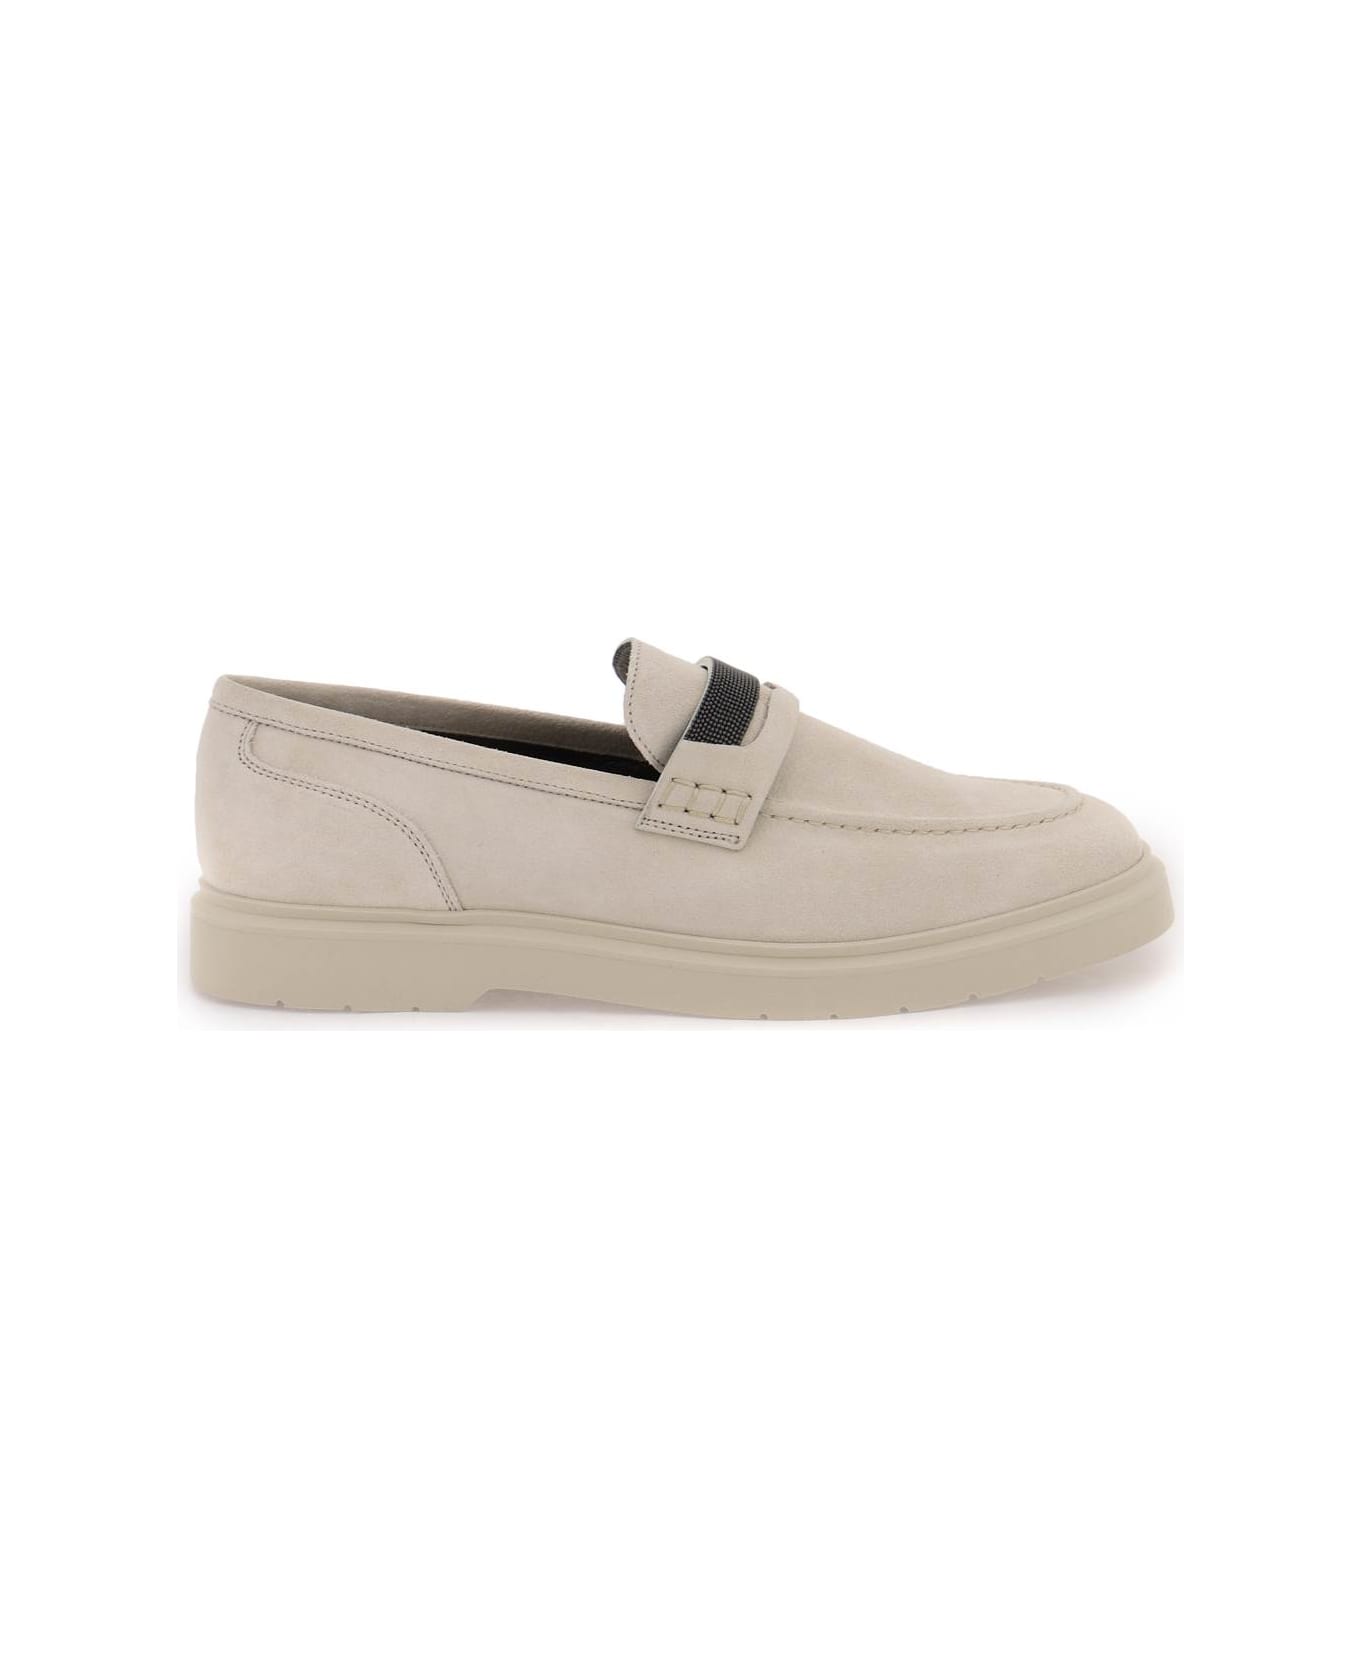 Brunello Cucinelli Suede Penny Loafer With Jewellery - Beige